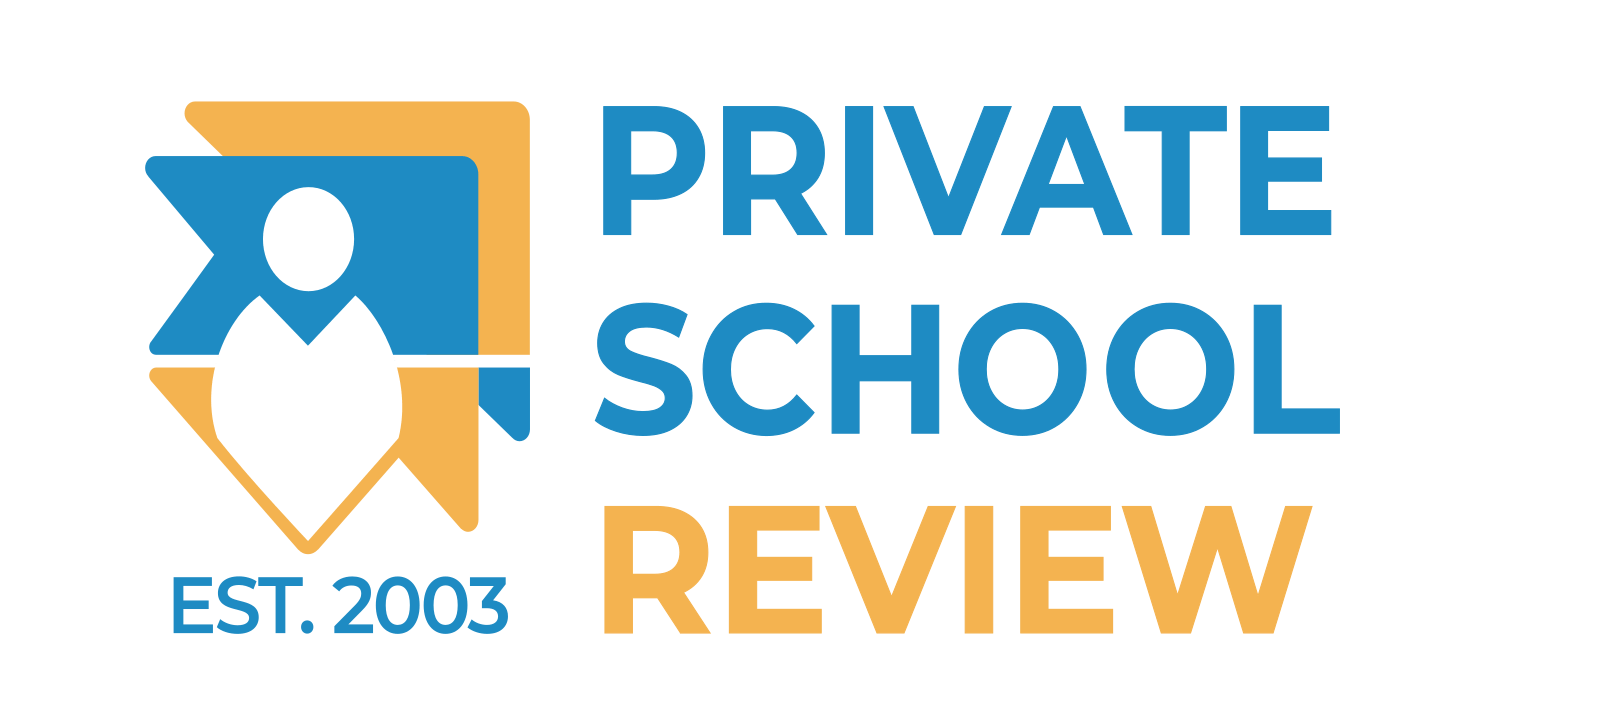 Private School Review Reviews